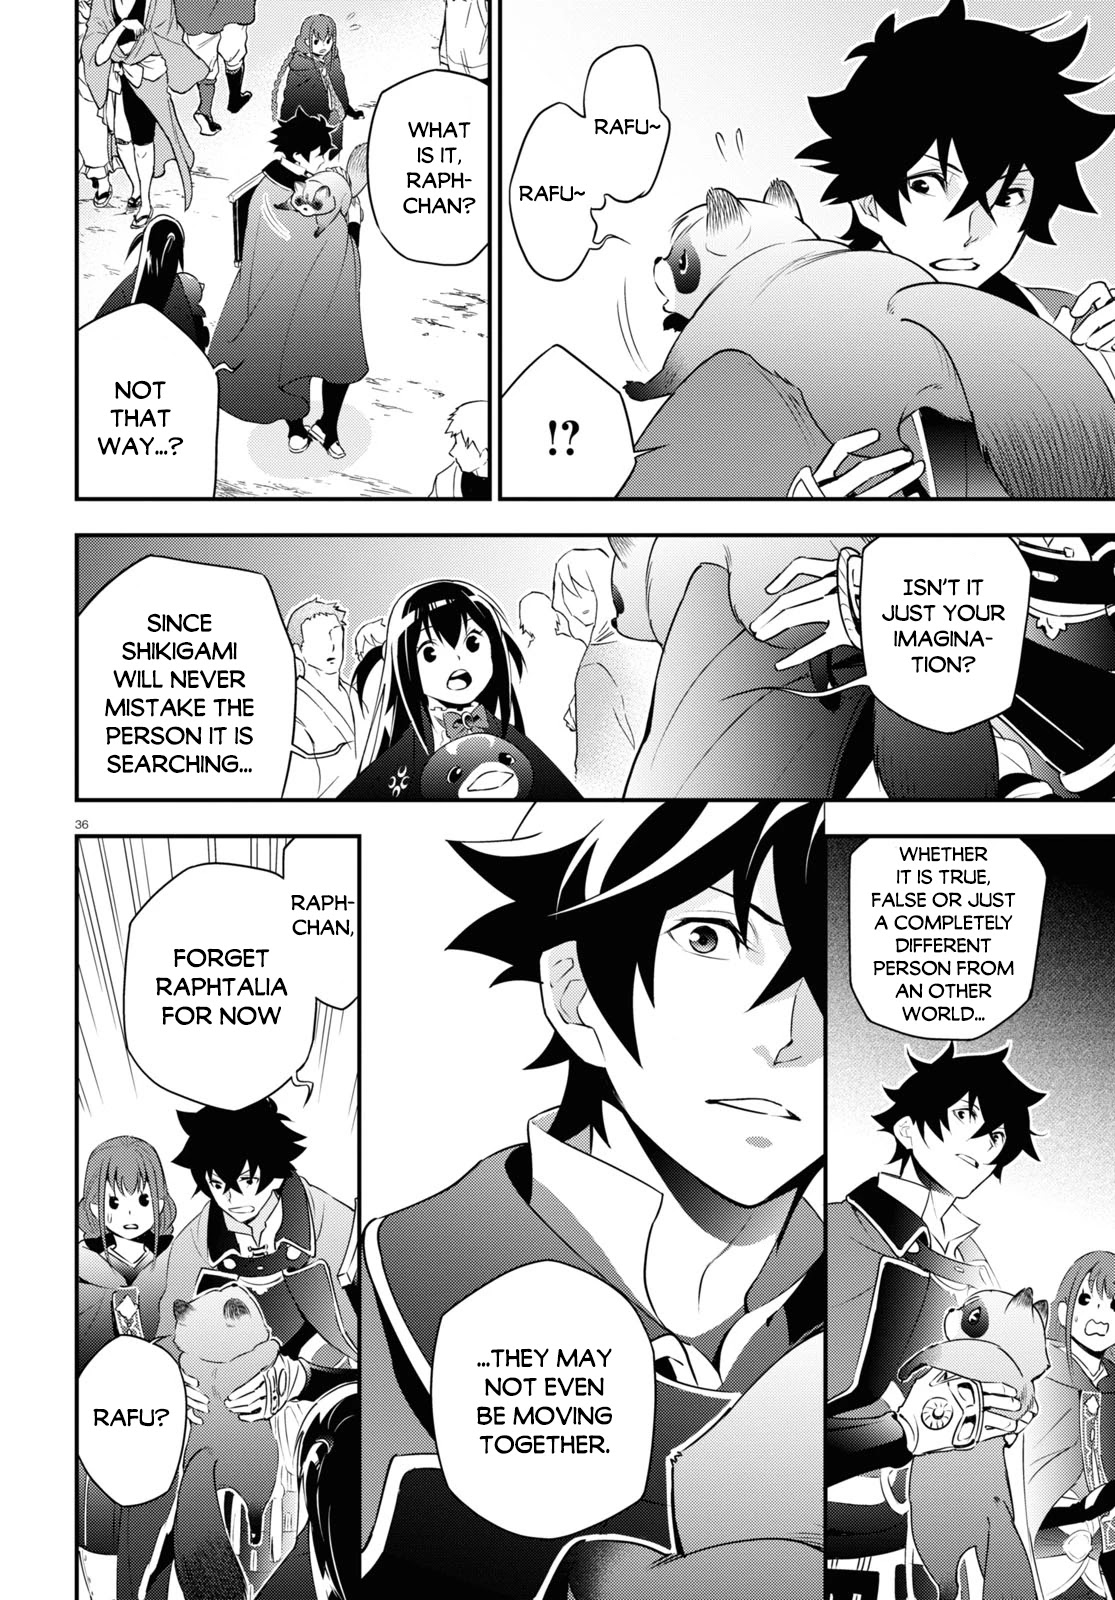 rising of the shield hero,  rising of the shield hero online,  rising of the shield hero manga online,  read rising of the shield hero,  read rising of the shield hero manga,  read rising of the shield hero online,  read rising of the shield hero manga online,  rising of the shield hero chapter,  read rising of the shield hero chapter,  rising of the shield hero chapters,  the rising of the shield hero,  the rising of the shield hero online,  the rising of the shield hero manga online,  read the rising of the shield hero,  read the rising of the shield hero manga,  read the rising of the shield hero online,  read the rising of the shield hero manga online,  the rising of the shield hero chapter,  read the rising of the shield hero chapter,  the rising of the shield hero chapters,  the rising of the shield hero japanese name,  the rising of the shield hero imdb,  the rising of the shield hero season 3,  the rising of the shield hero netflix,  the rising of the shield hero season 2 episode 1,  the rising of the shield hero light novel,  the rising of the shield hero fanfiction,  anime like the rising of the shield hero,  Tate no Yuusha no Nariagari,  Tate no Yuusha no Nariagari manga,  Tate no Yuusha no Nariagari online,  Tate no Yuusha no Nariagari manga online,  read Tate no Yuusha no Nariagari,  read Tate no Yuusha no Nariagari manga,  read Tate no Yuusha no Nariagari online,  read Tate no Yuusha no Nariagari manga online,  Tate no Yuusha no Nariagari chapter,  read Tate no Yuusha no Nariagari chapter,  Tate no Yuusha no Nariagari chapters,  盾の勇者の成り上がり,  盾の勇者の成り上がり manga,  盾の勇者の成り上がり online,  盾の勇者の成り上がり manga online,  read 盾の勇者の成り上がり,  read 盾の勇者の成り上がり manga,  read 盾の勇者の成り上がり online,  read 盾の勇者の成り上がり manga online,  盾の勇者の成り上がり chapter,  read 盾の勇者の成り上がり chapter,  盾の勇者の成り上がり chapters,  the rising of the shield hero manga volume 10,  the rising of the shield hero episodes,  the rising of the shield hero manga volume 12,  the rising of the shield hero manga after anime,  the rising of the shield hero manga naofumi and raphtalia kiss,  the rising of the shield hero manga barnes and noble,  will there be a season 2 of the rising shield hero,  is heroes rising canon to the anime,  the rising of the shield hero manga box set,  the rising of the shield hero manga companion,  the rising of the shield hero manga crunchyroll,  the rising of the shield hero manga collection,  the rising of the shield hero manga ending,  the rising of the shield hero anime end in manga,  has the rising of the shield hero ended,  will naofumi and raphtalia end up together,  will raphtalia end up with naofumi,  the rising of the shield hero manga finished,  is rise of the shield hero finished,  the rising of the shield hero manga,  the rising of the shield hero manga vs light novel,  the rising of the shield hero manga volume 13,  does naofumi fall in love with raphtalia,  why does raphtalia love naofumi,  does naofumi and raphtalia kiss,  did naofumi and raphtalia kiss,  the rising of the shield hero manga mal,  the rising of the shield hero manga over,  the rising of the shield hero manga order,  where does the rising of the shield hero leave off in the manga,  the rising of the shield hero manga review,  the rising of the shield hero manga reddit,  rising of the shield hero manga,  is the rising shield hero good,  the rising of the shield hero manga set,  the rising of the shield hero the manga companion season 2,  the rising of the shield hero the manga companion,  the rising of the shield hero manga volumes,  the rising of the shield hero manga volume 15,  the rising of the shield hero manga volume 6,  the rising of the shield hero manga vs anime,  the rising of the shield hero manga volume 11,  the rising of the shield hero manga volume 2,  the rising of the shield hero manga volume 16,  the rising of the shield hero manga volume 5,  the rising of the shield hero manga wiki,  where does the rising of the shield hero anime end in the manga,  the rising of the shield hero volume 01 the manga companion,  the rising of the shield hero volume 22,  the rising of the shield hero volume 20,  the rising of the shield hero volume 23 illustrations,  the rising of the shield hero volume 21,  the rising of the shield hero volume 23 release date,  the rising of the shield hero volume 22 illustrations,  the rising of the shield hero volume 21 illustrations,  the rising of the shield hero volume 20 illustrations,  the rising of the shield hero volume 2,  the rising of the shield hero volume 22 summary,  the rising of the shield hero season 2 release date,  aneko yusagi,  shield hero manga where anime ends,  the rising of the shield hero season 2,  the rising of the shield hero wiki,  the rising of the shield hero characters,  the rising of the shield hero manga chapter after anime,  tate no yuusha no nariagari manga after anime,  tate no yuusha no nariagari manga artist,  is tate no yuusha no nariagari finished,  does raphtalia confess to naofumi,  does raphtalia betray naofumi,  tate no yuusha no nariagari manga empik,  will there be a season 2 of tate no yuusha no nariagari,  tate no yuusha no nariagari manga wiki,  tate no yuusha no nariagari manga livre,  tate no yuusha no nariagari anime end in manga,  is tate no yuusha over,  jadwal rilis manga tate no yuusha no nariagari,  tate no yuusha no nariagari spin off manga,  tate no yuusha no nariagari manga pl sklep,  tate no yuusha no nariagari rating,  tate no yuusha no nariagari volume 22 illustrations,  tate no yuusha no nariagari volume 20 illustrations,  tate no yuusha no nariagari volume 21 illustrations,  tate no yuusha no nariagari volume 23 illustrations,  shield hero volume 22 illustrations,